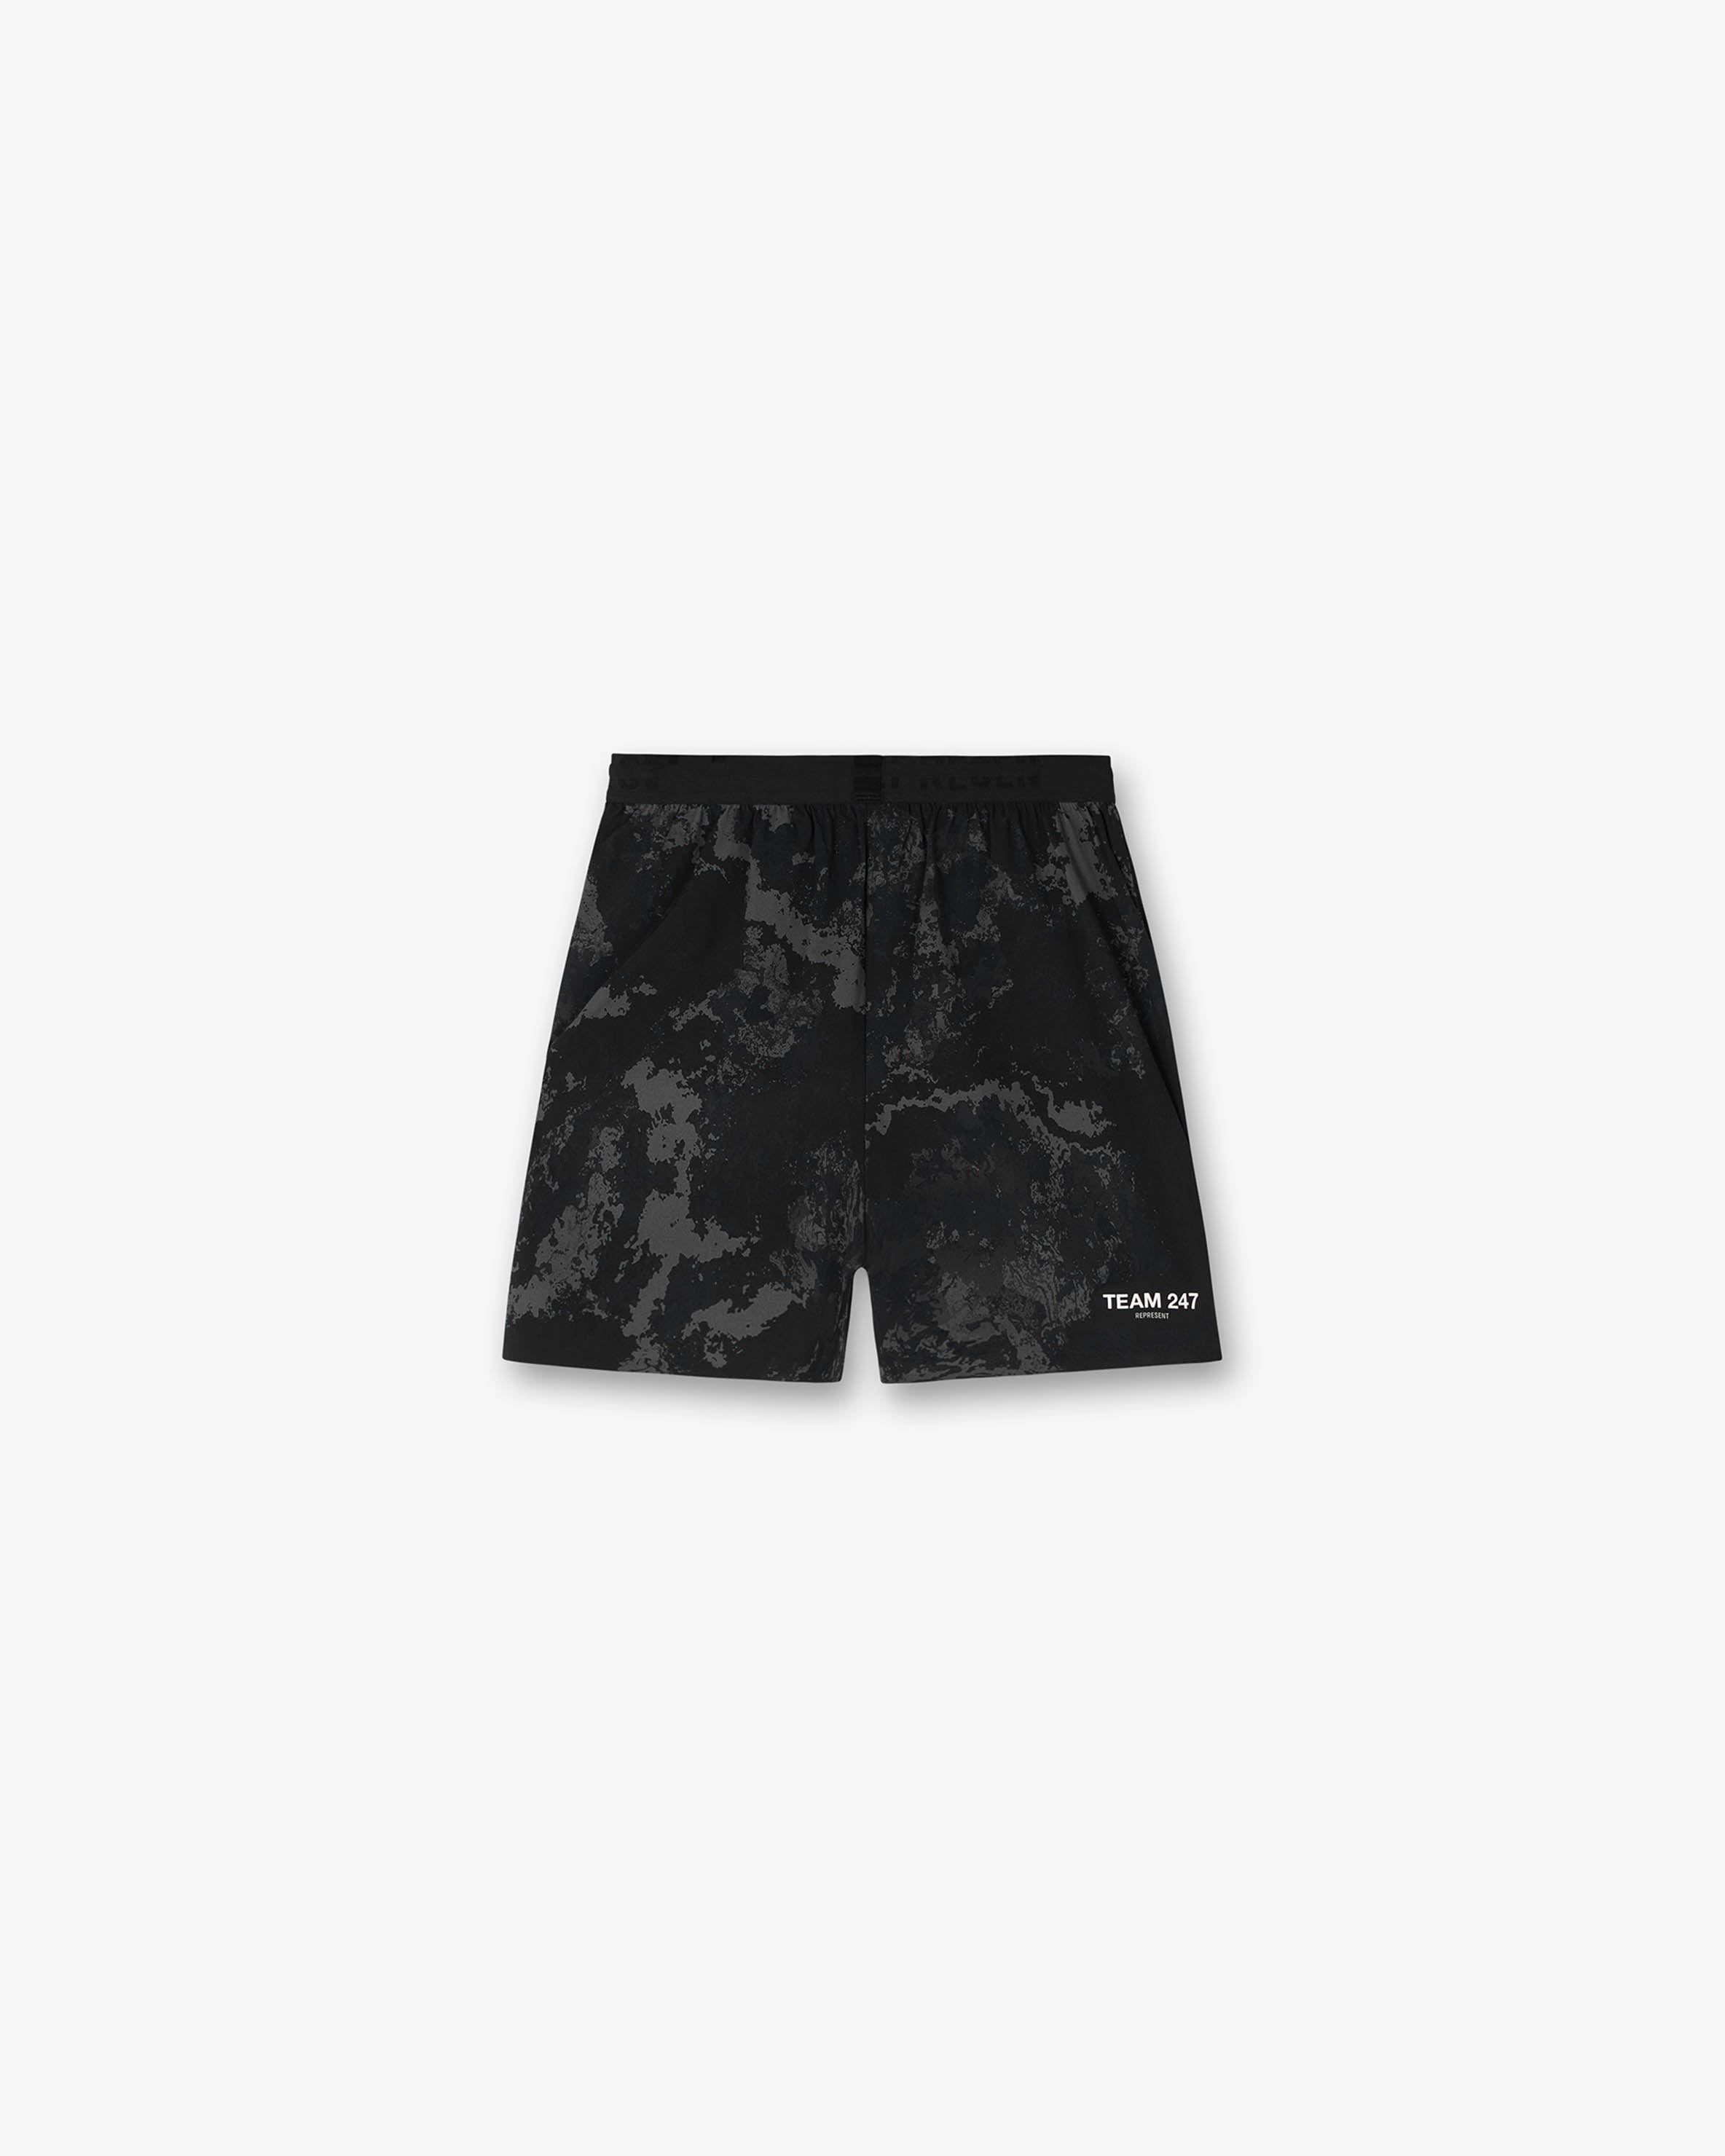 Team 247 Fused Shorts X WIT - Camo